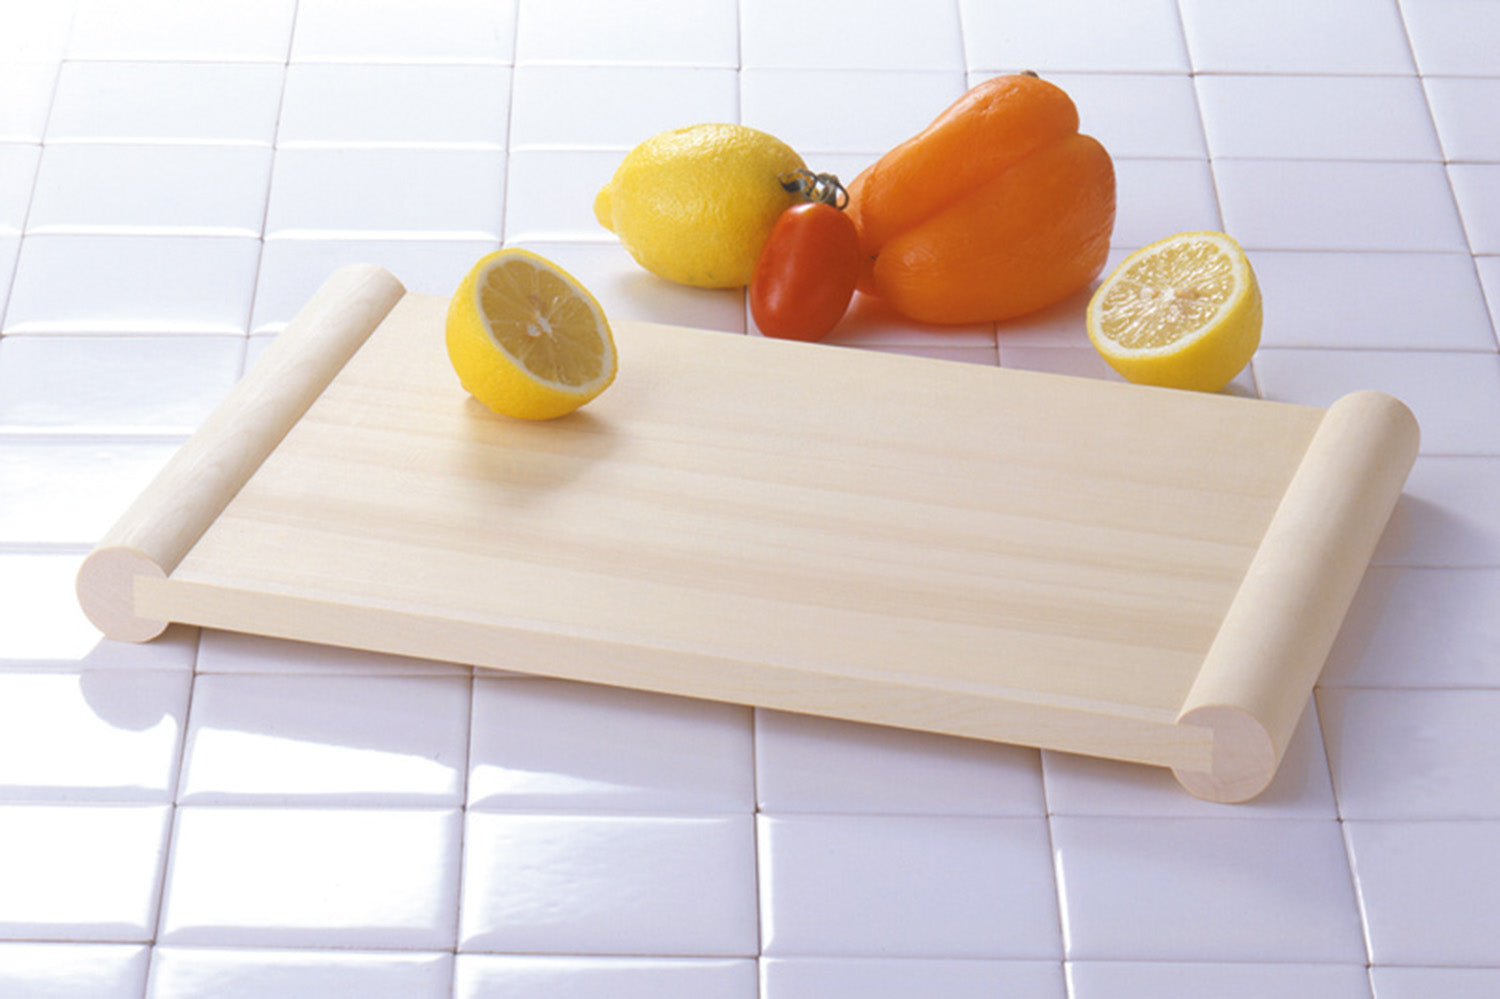 Kitchen Cutting Board Japanese HINOKI Cypress Wooden Both Sides Use Pier Stand - JAPANESE GIFTS 